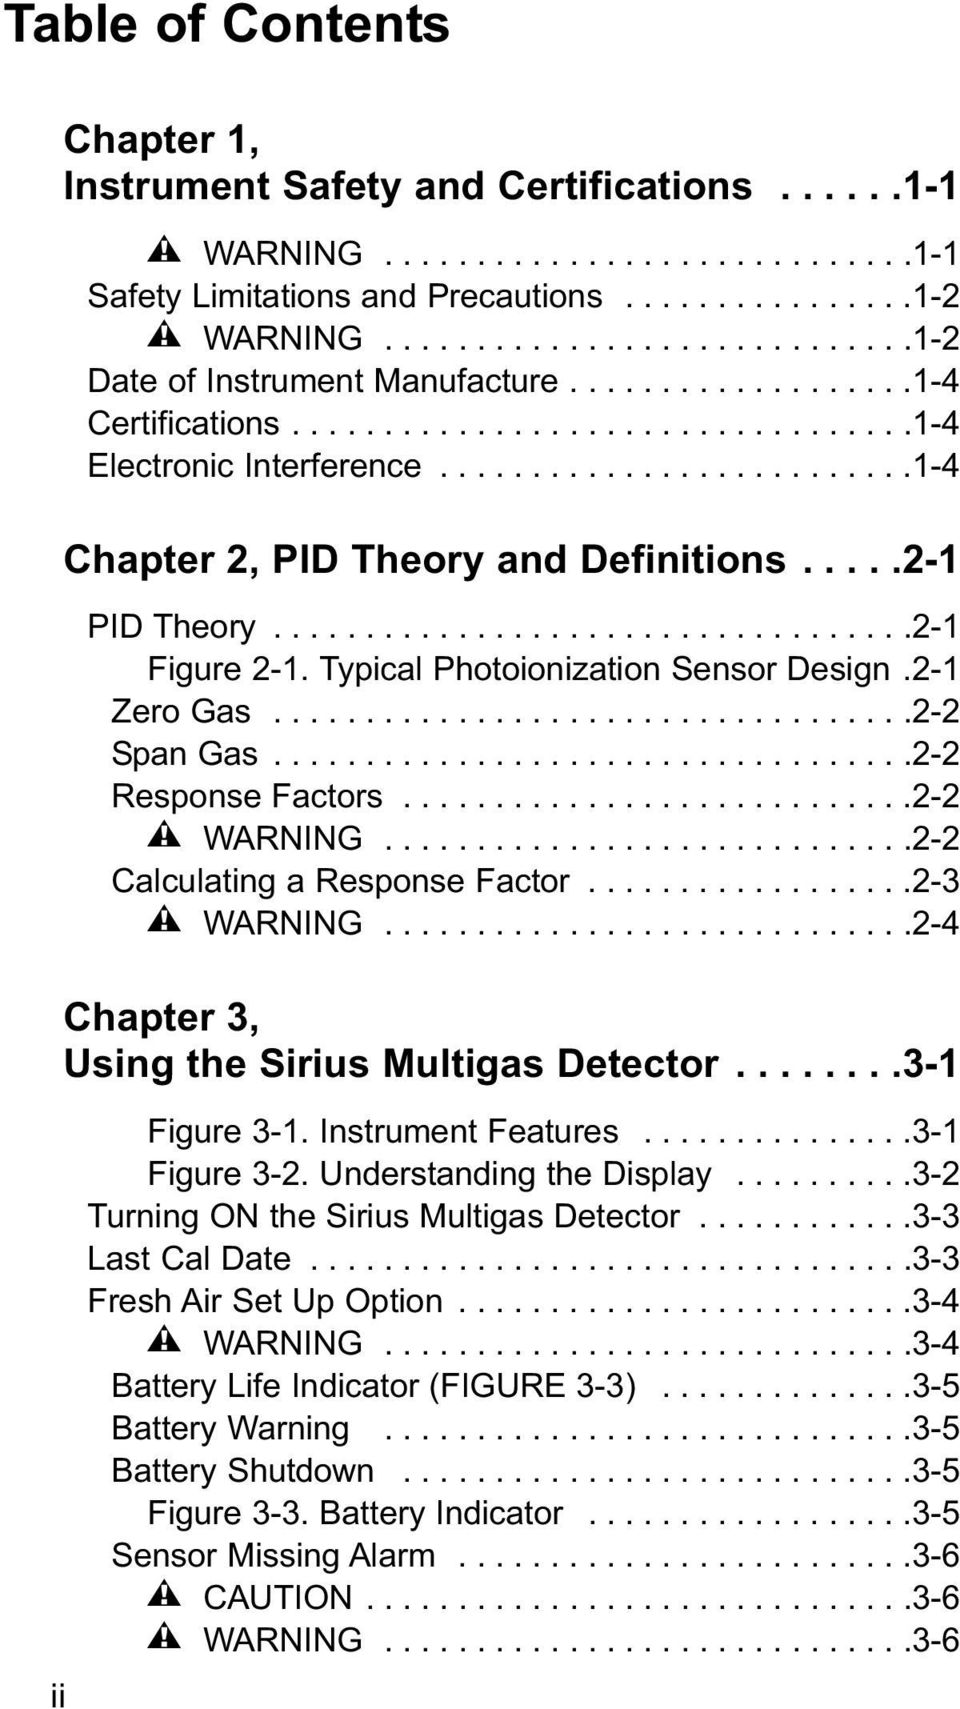 .........................1-4 Chapter 2, PID Theory and Definitions.....2-1 PID Theory...................................2-1 Figure 2-1. Typical Photoionization Sensor Design.2-1 Zero Gas...................................2-2 Span Gas.